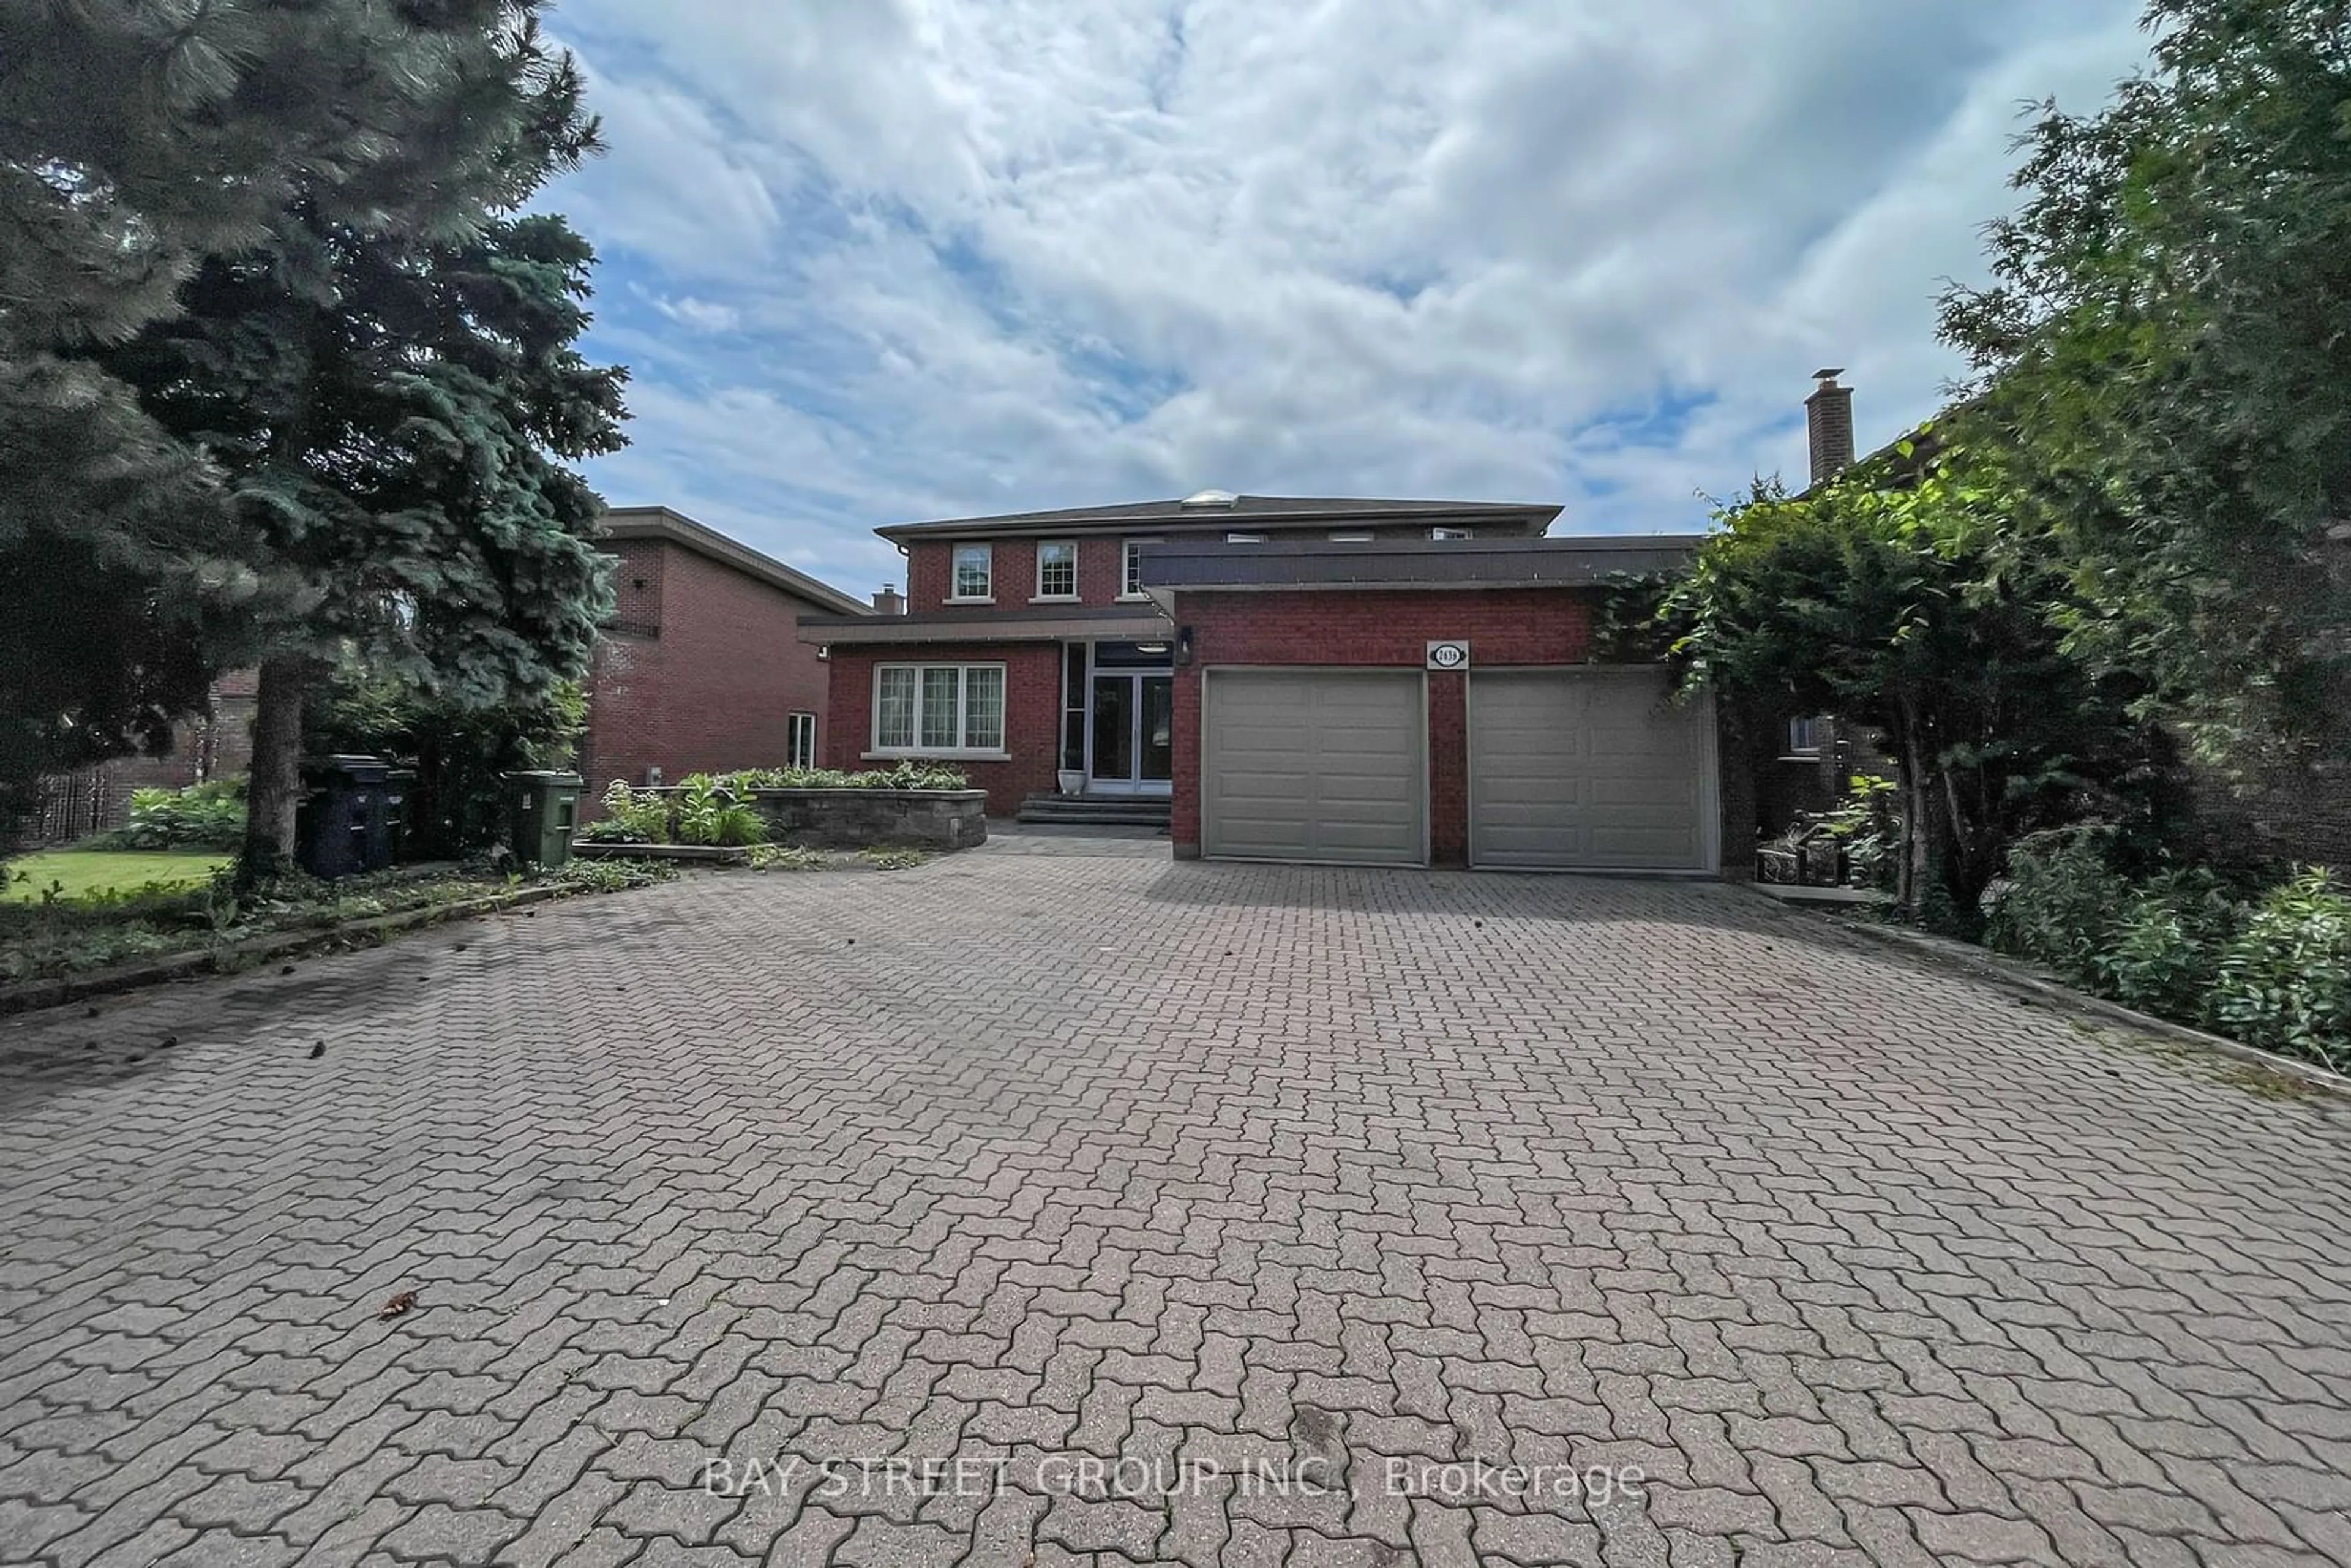 Home with brick exterior material for 2636 Kennedy Rd, Toronto Ontario M1T 3H1